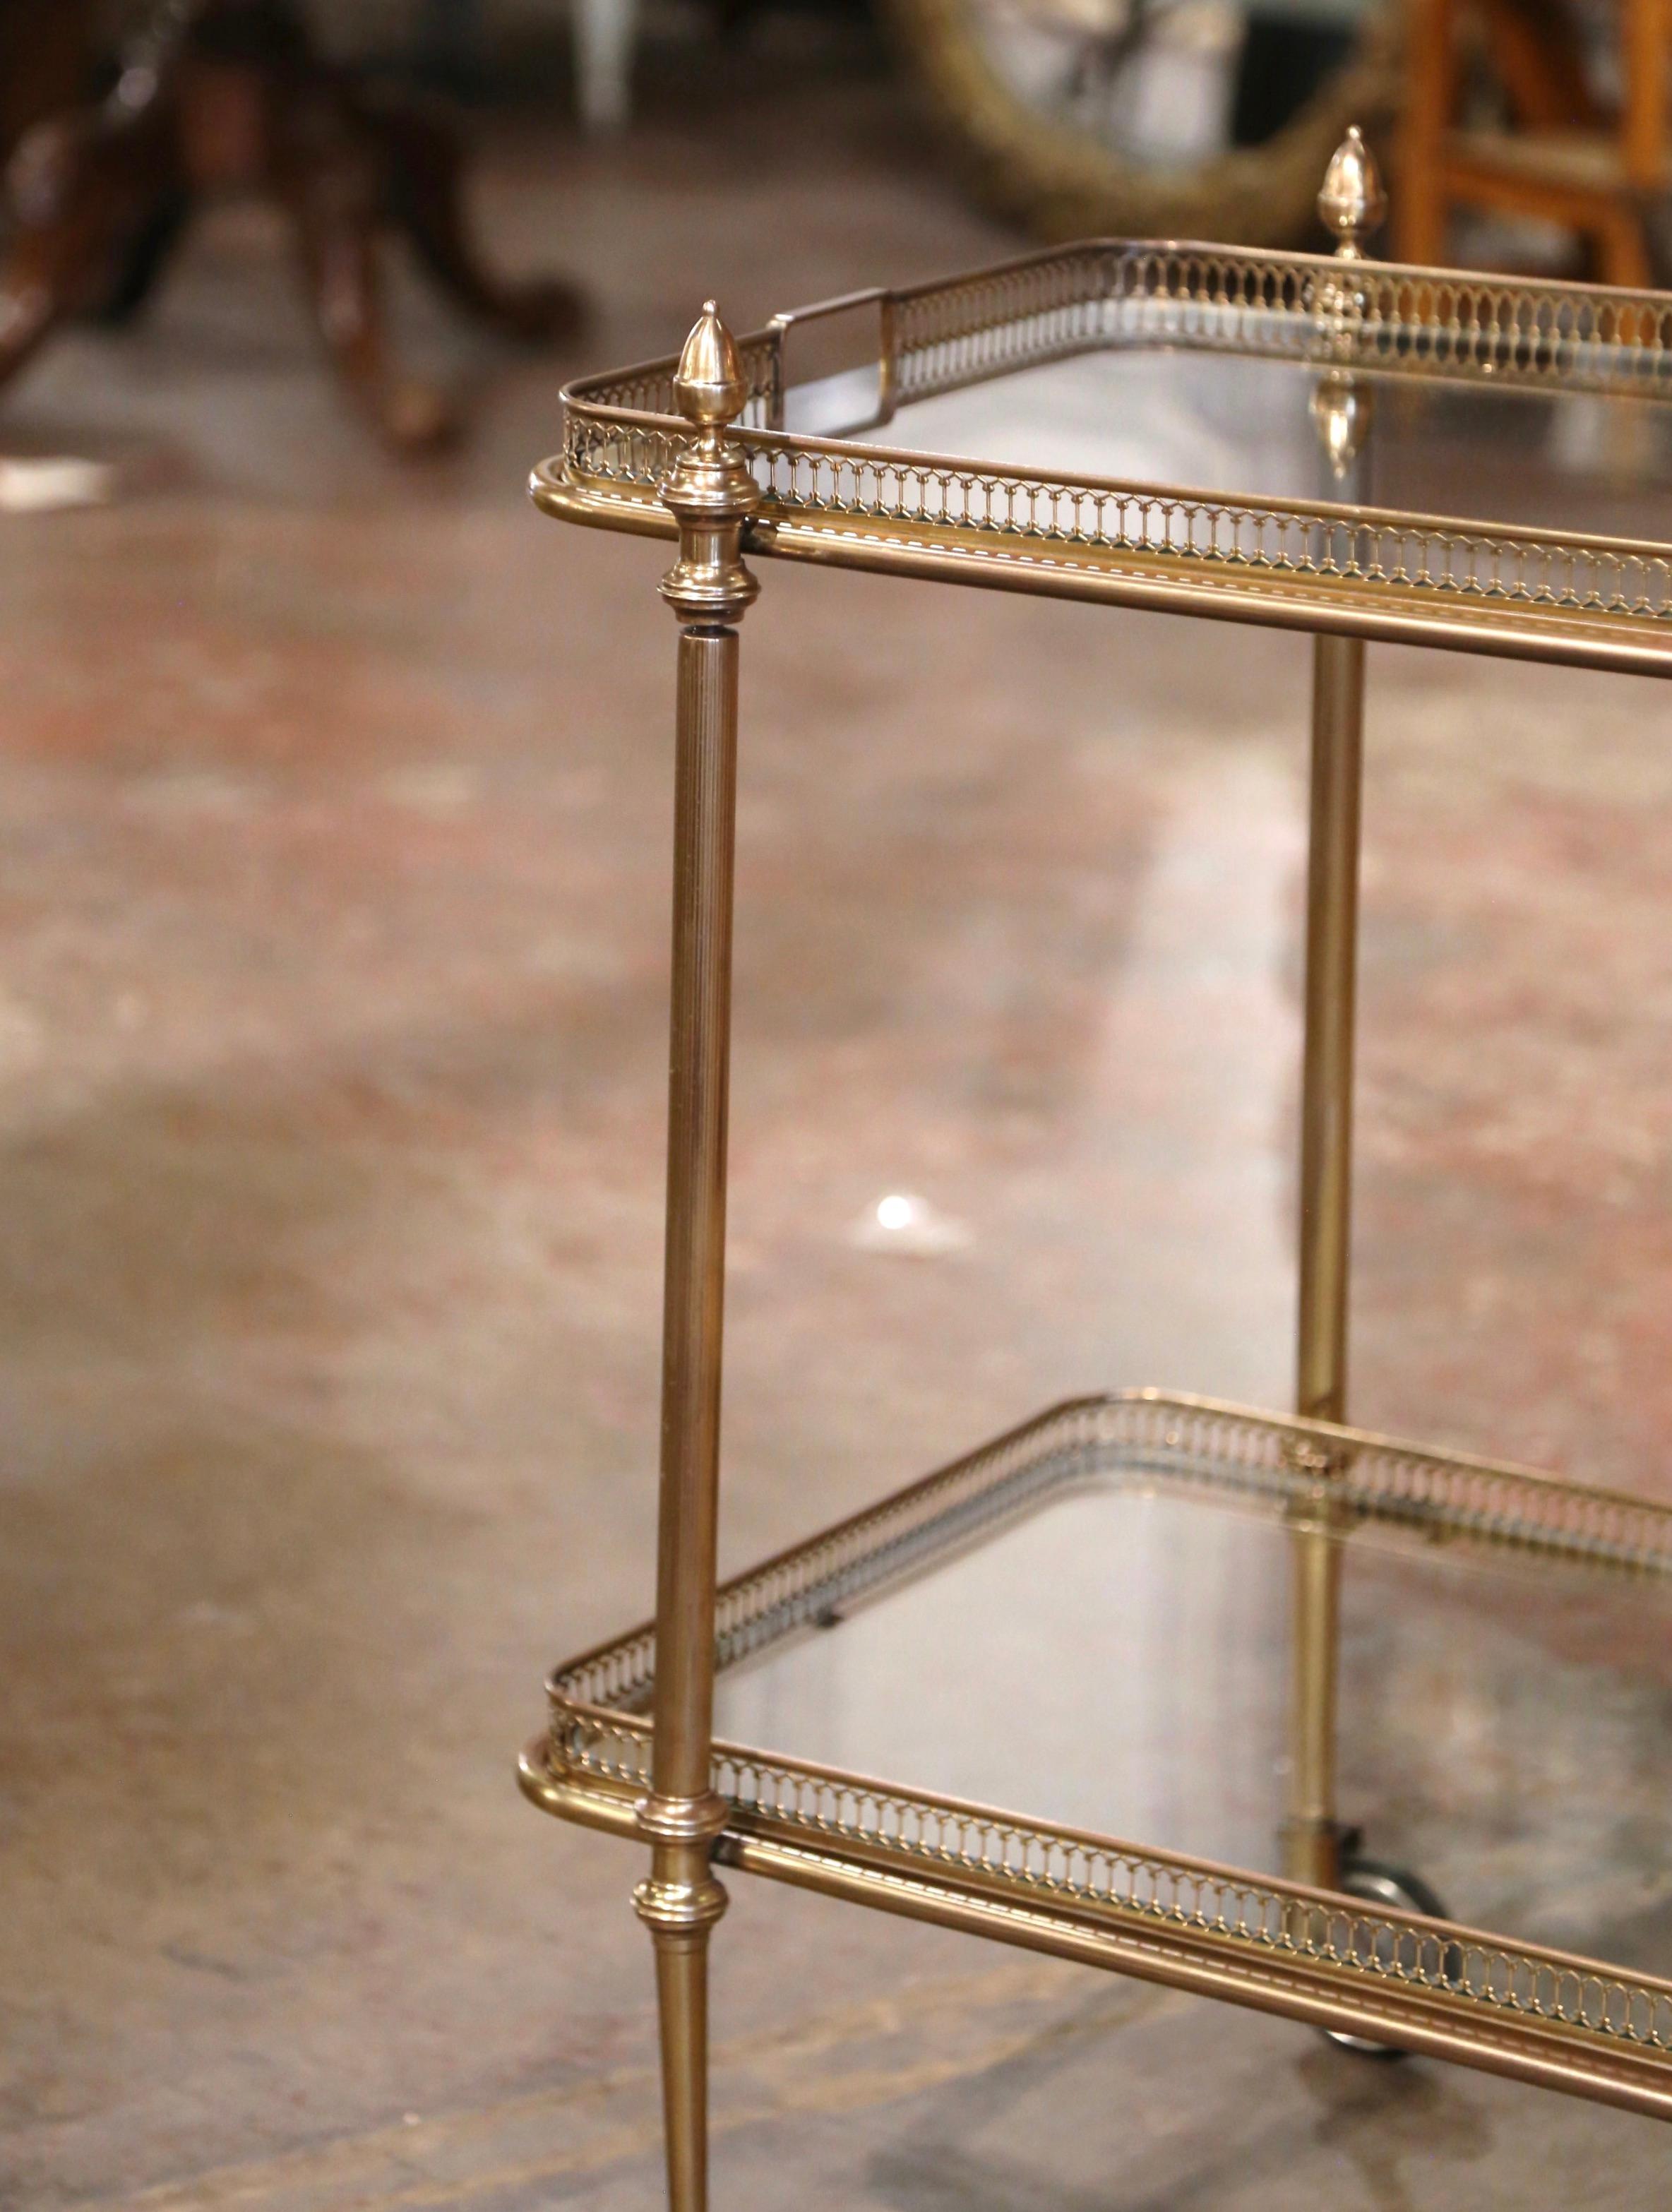 Early 20th Century French Gilt Brass Two-Tier Service Trolley Bar Cart on Wheels 1